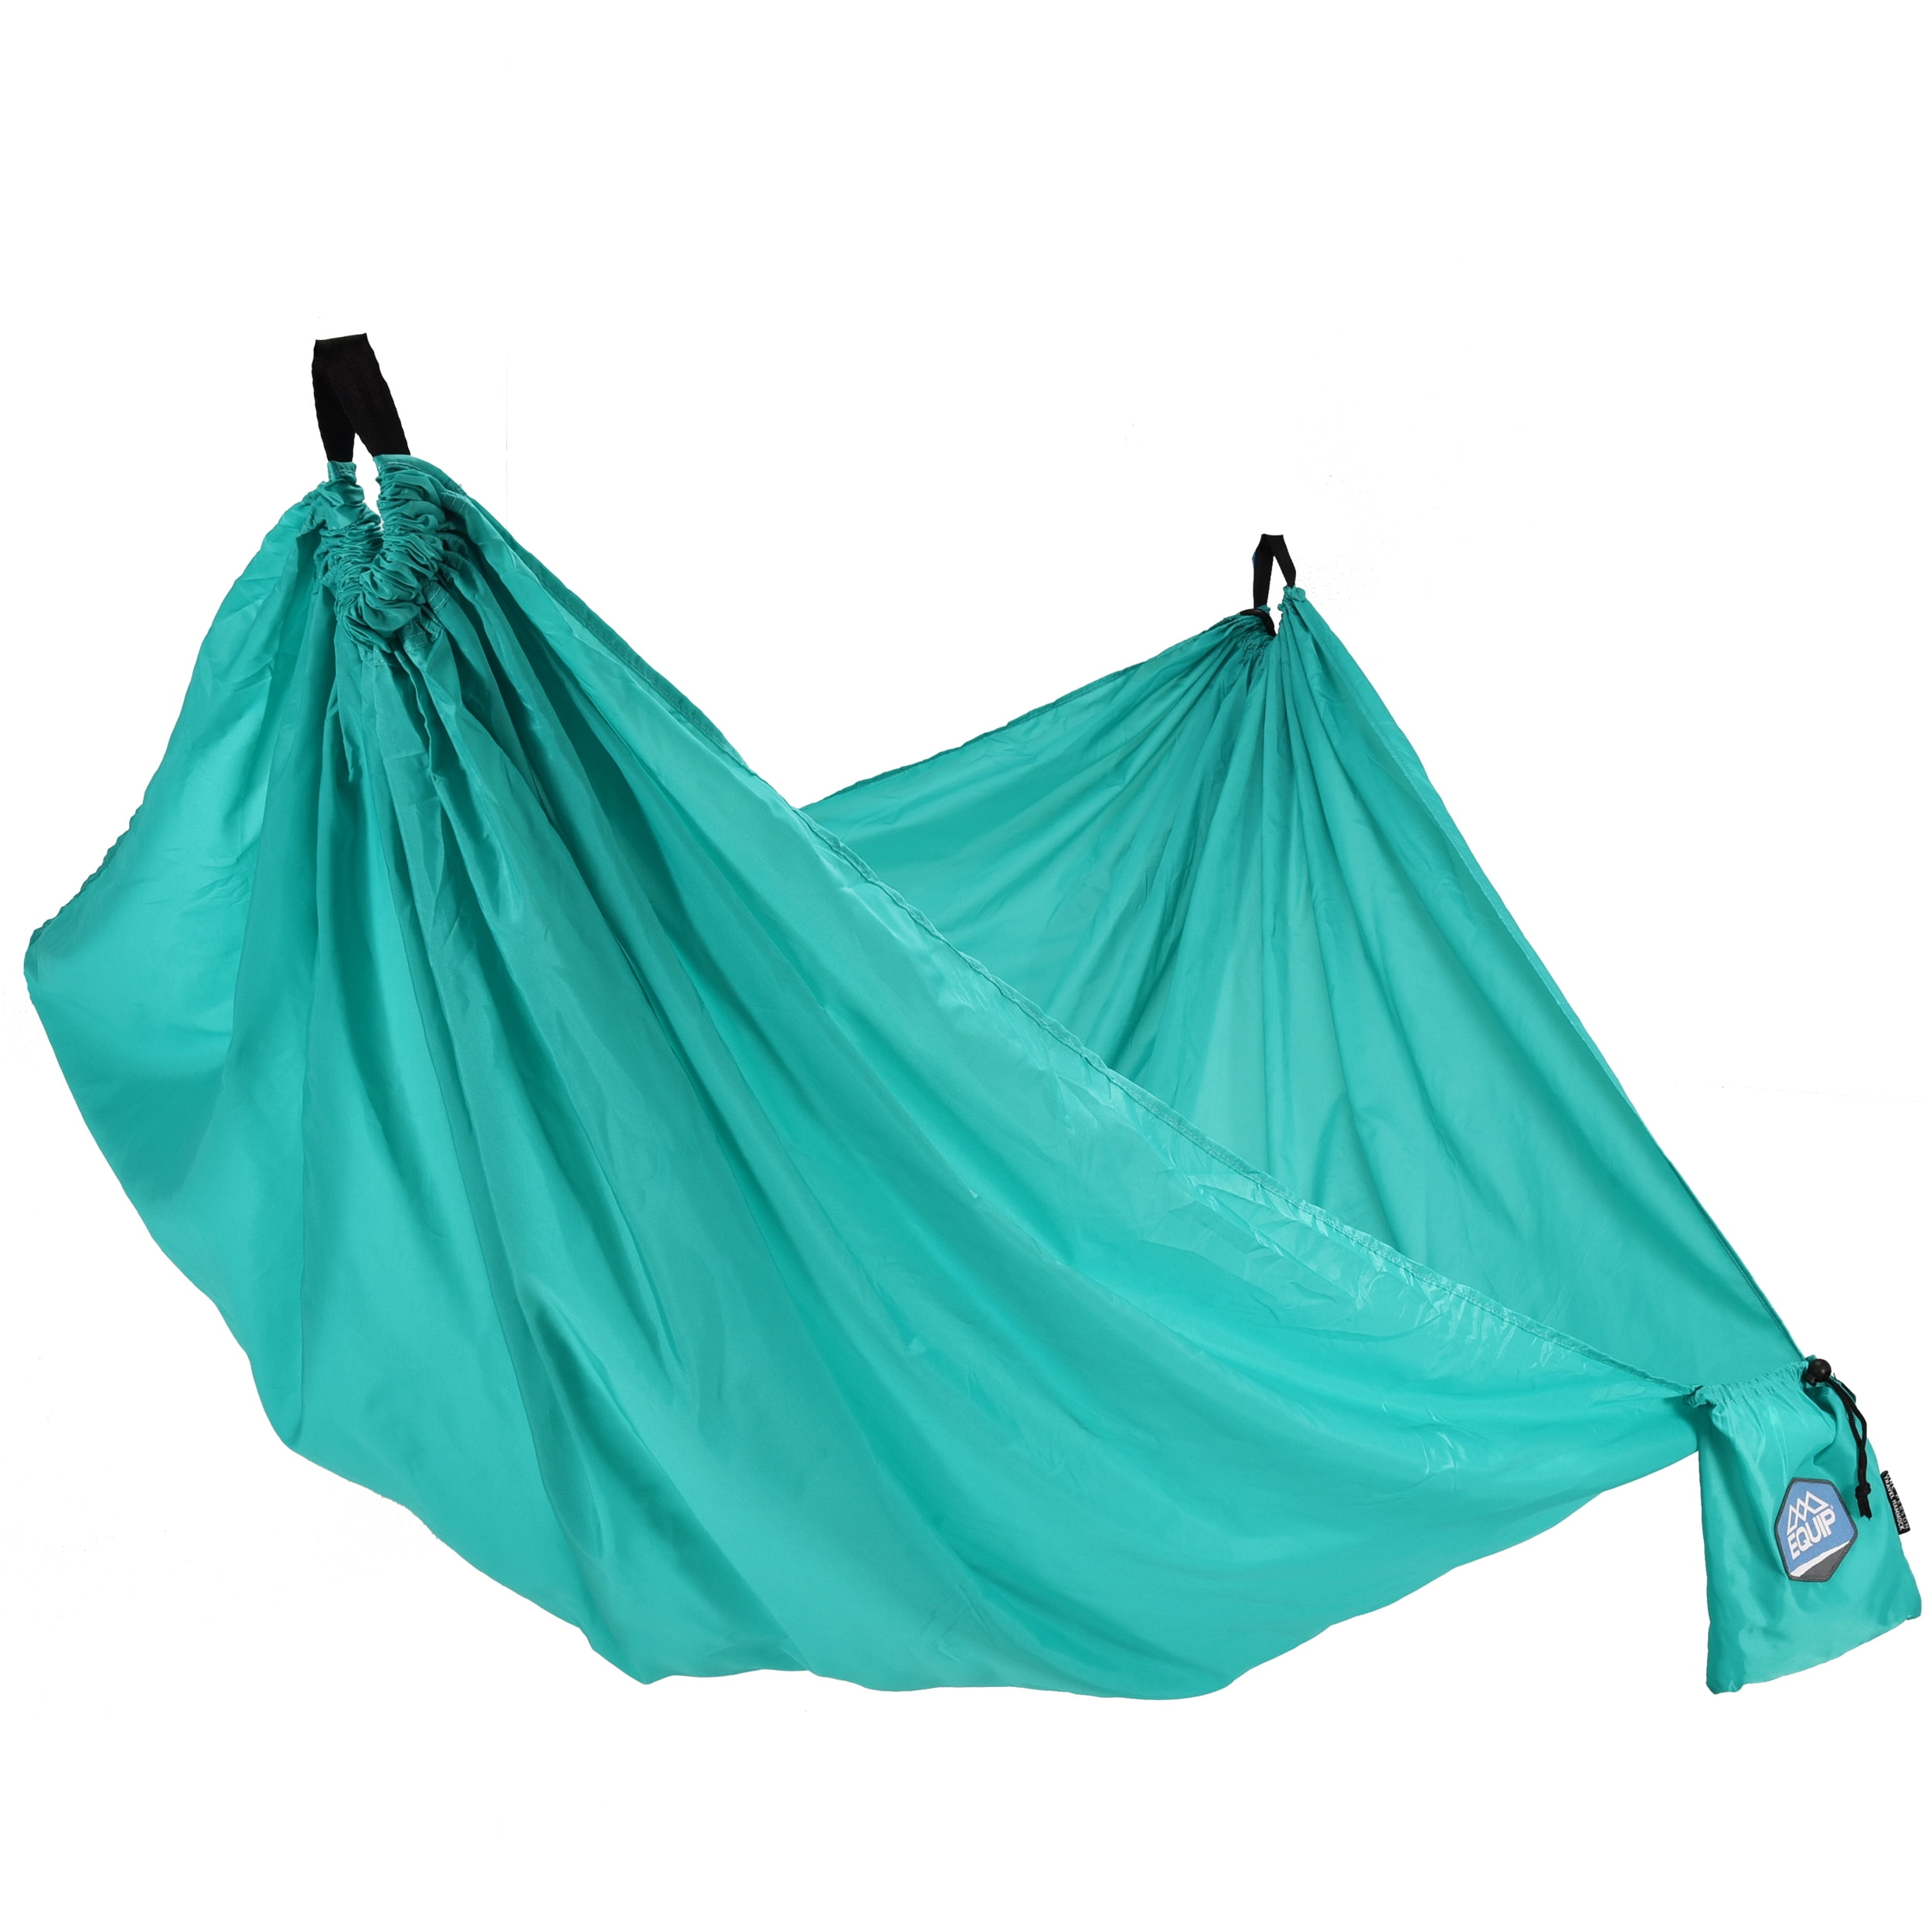 Mainstays Teal Quilted Double Hammock with Pillow, Green Color 